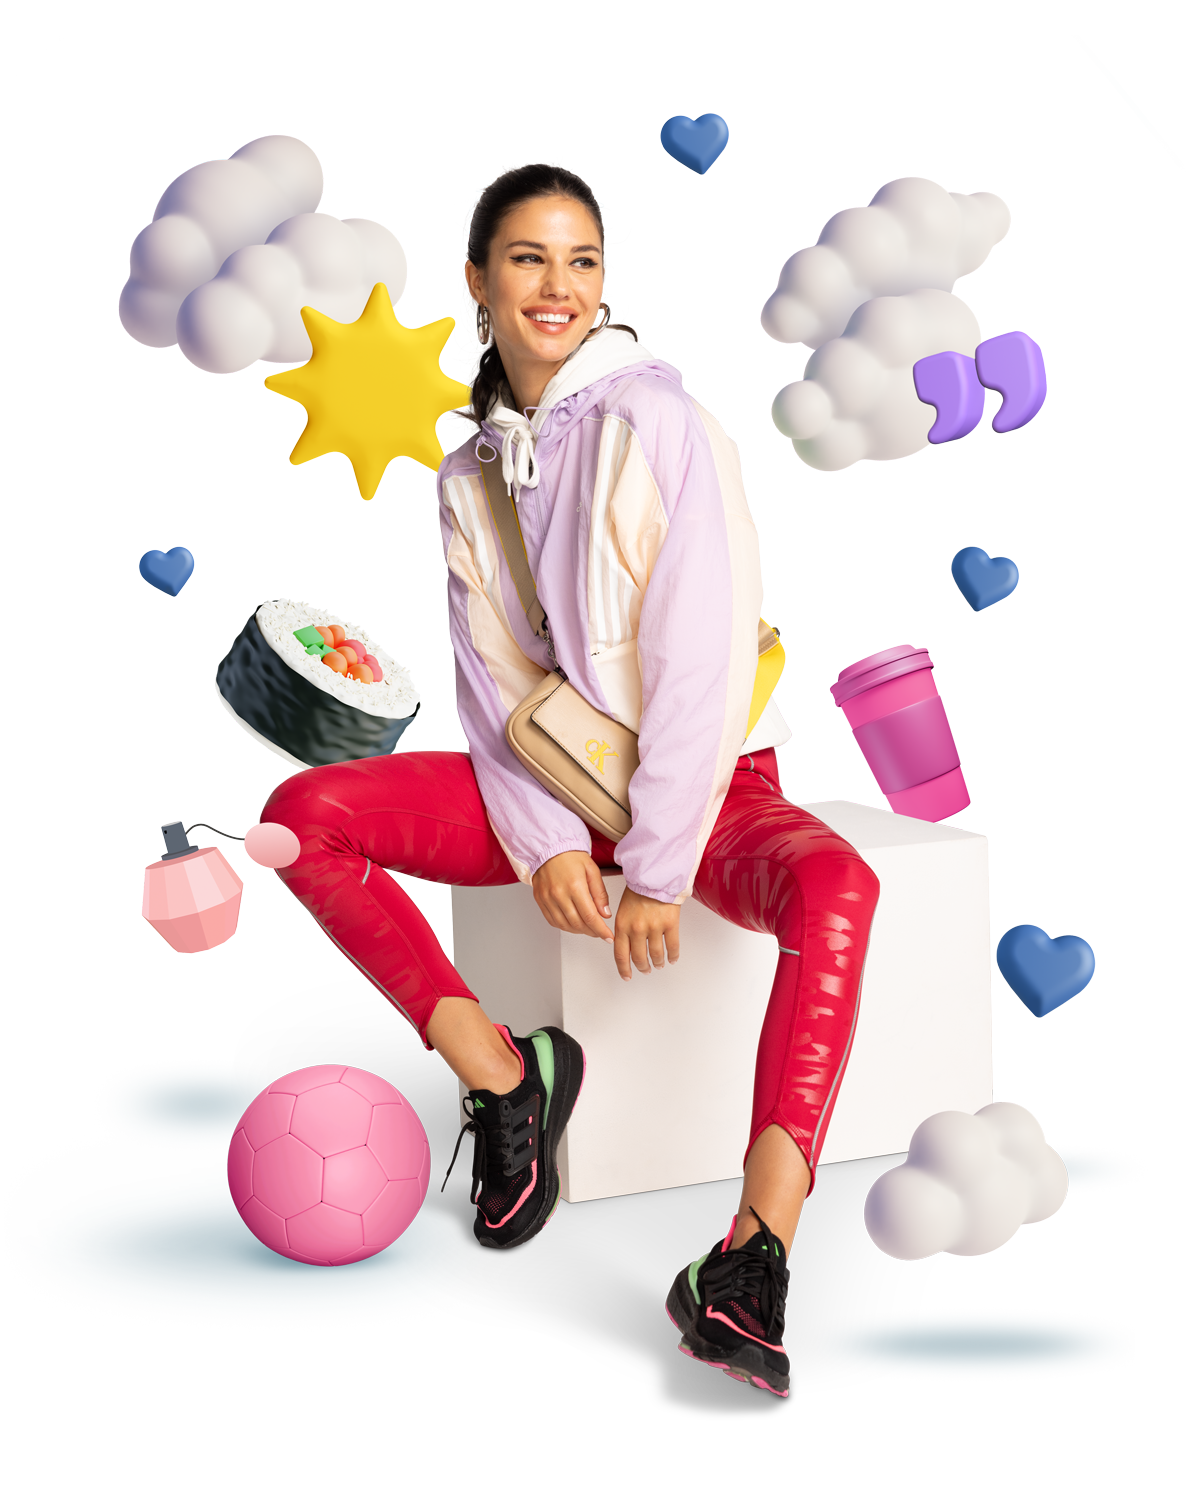 Photo of a person wearing clothing from Dress Smart Christchurch brands. There are several fun 3D oversized objects rendered around the person, including a sun, a piece of sushi, a takeaway coffee cup and love hearts.